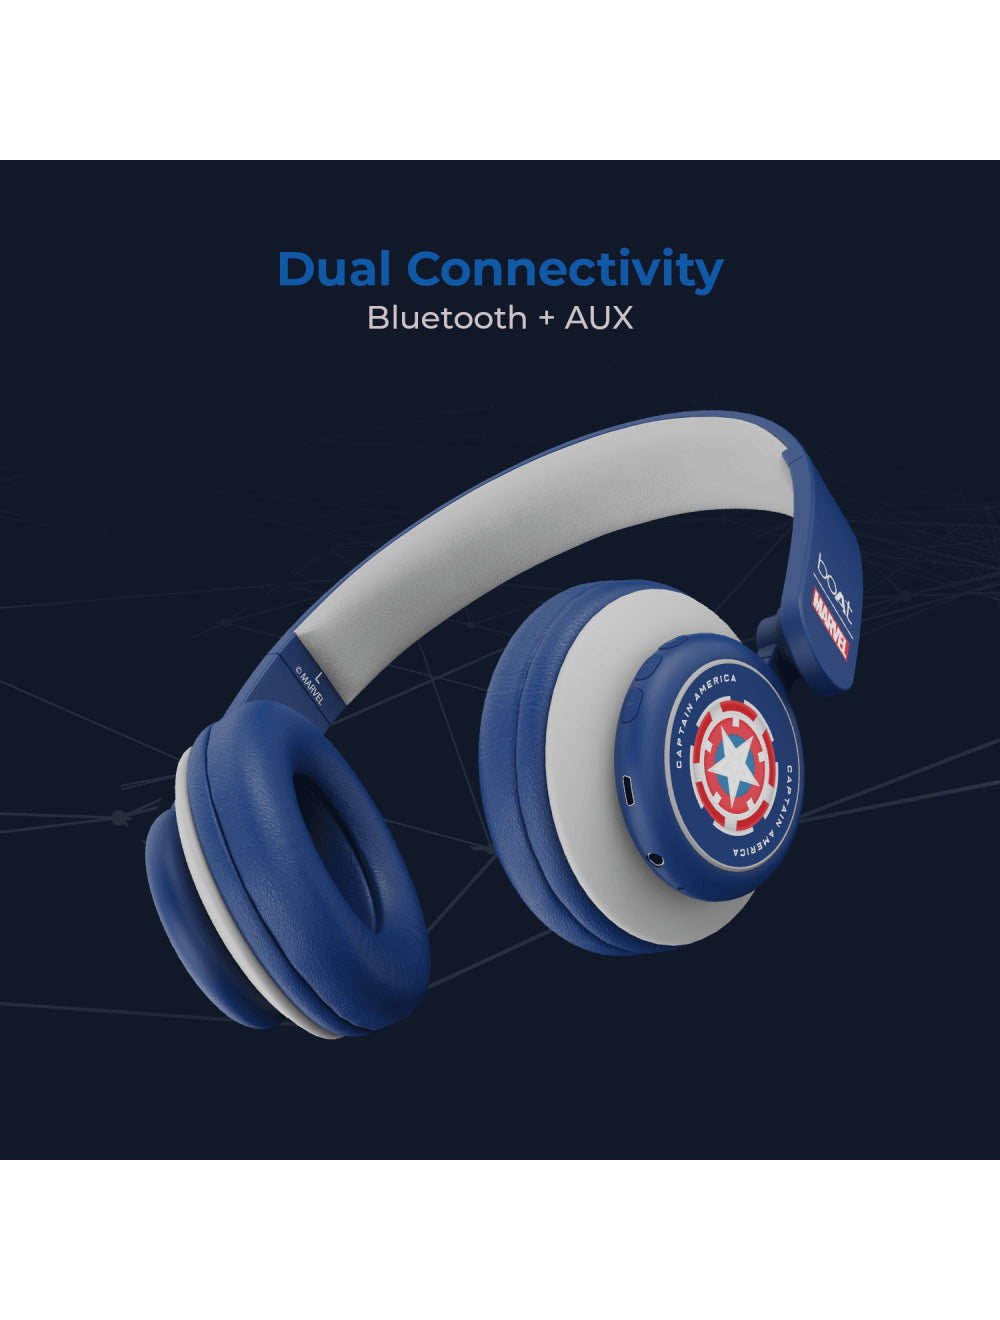 boAt Rockerz 450 Captain America Marvel Edition | Bluetooth Headphones with 40mm Audio Drivers, 15H Playback, Voice Assistant, Dual Connectivity